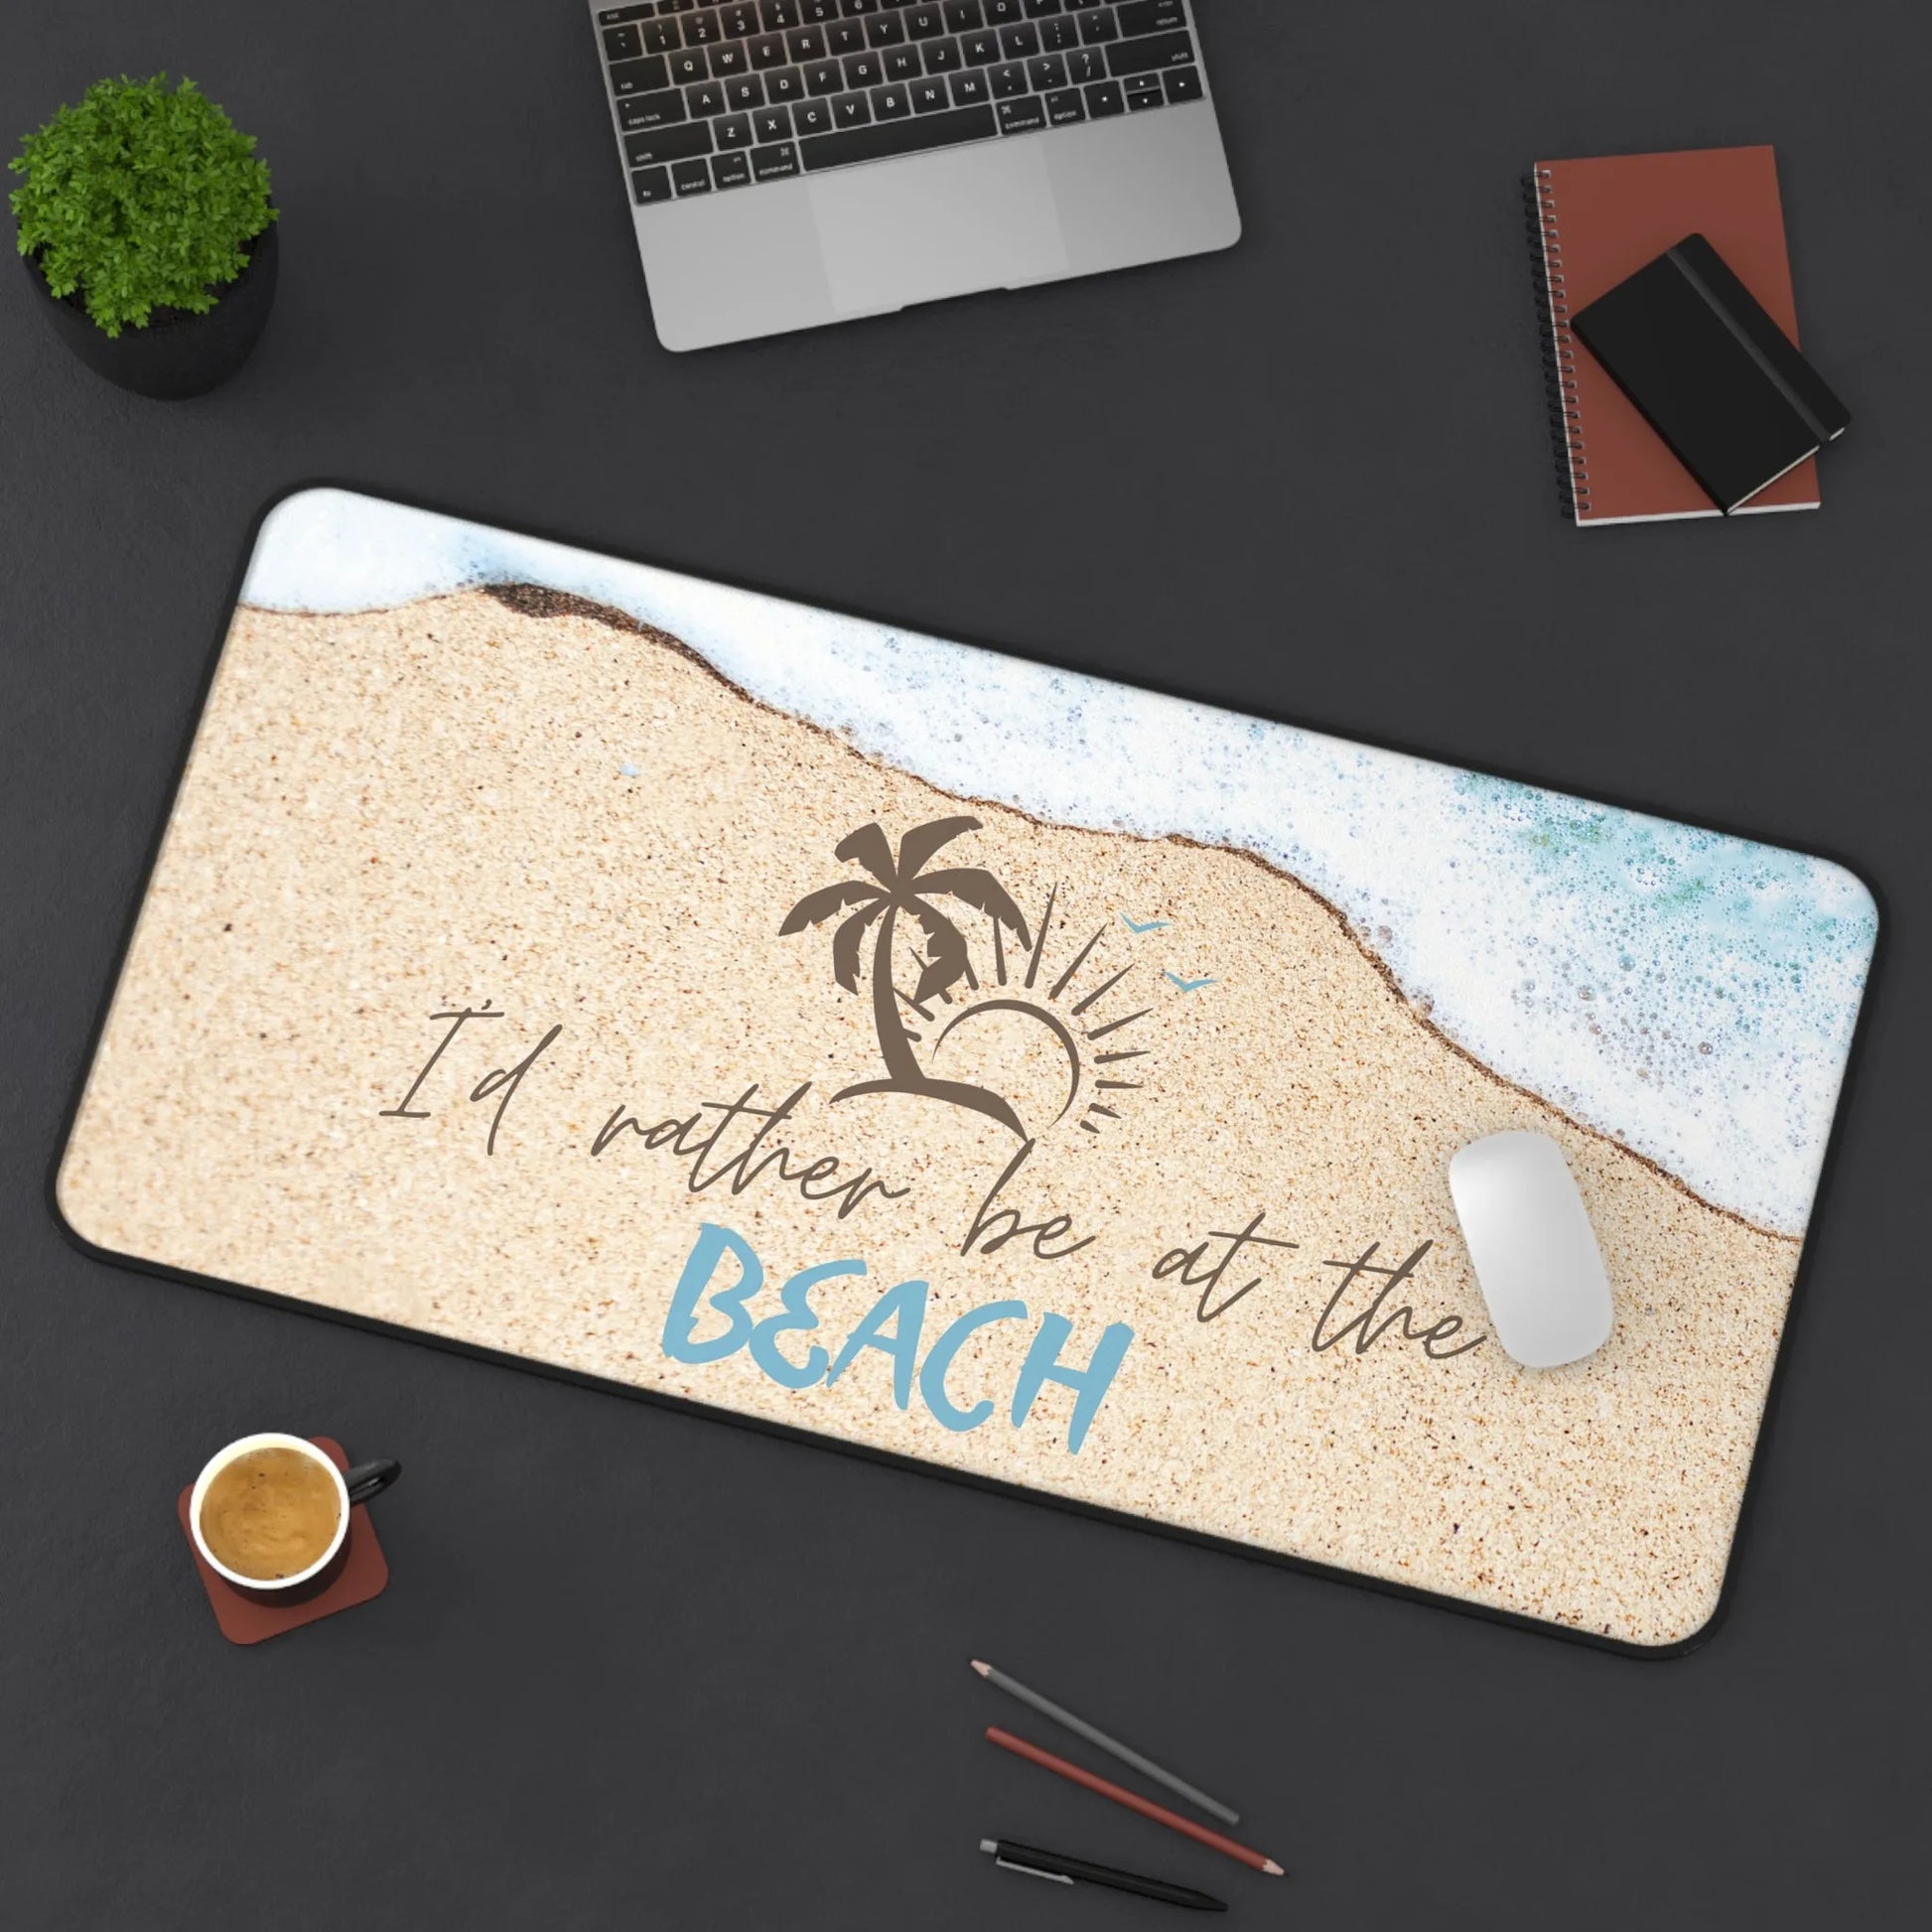 I'd Rather Be At The Beach Desk Mat - I'd Rather Be At The Beach Mouse Pad Large